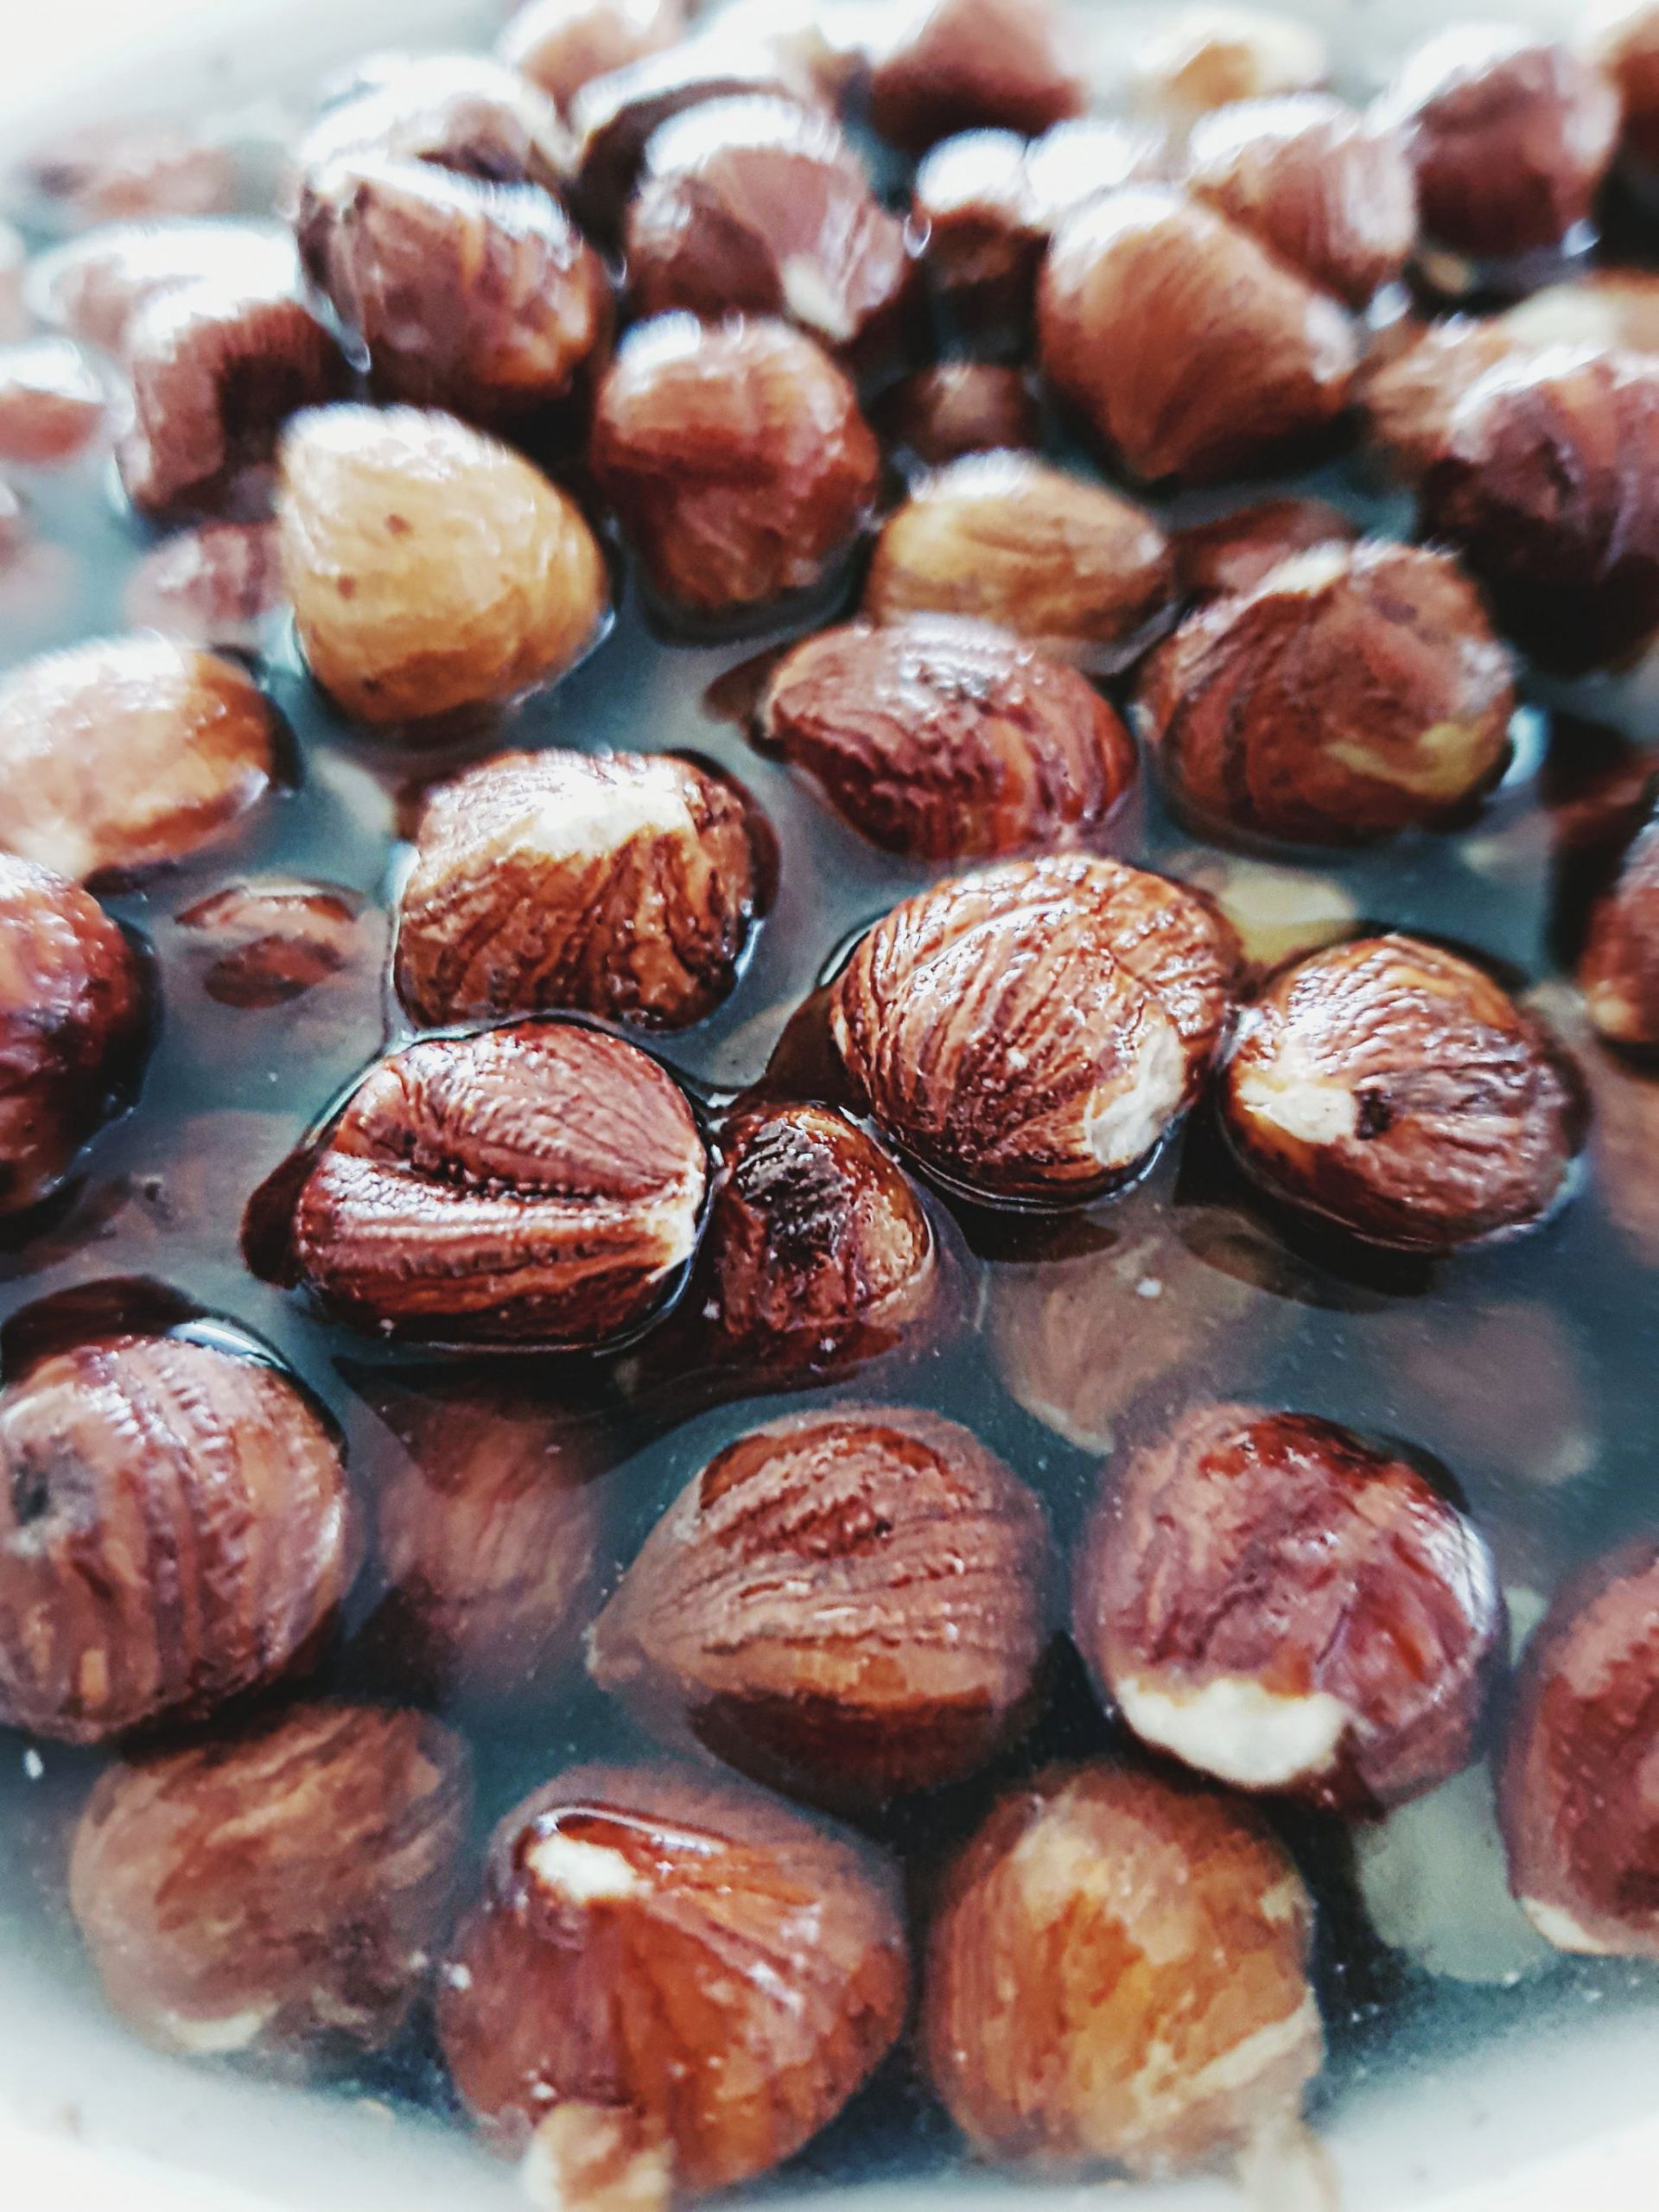 Soak the nuts in water for 2 hrs